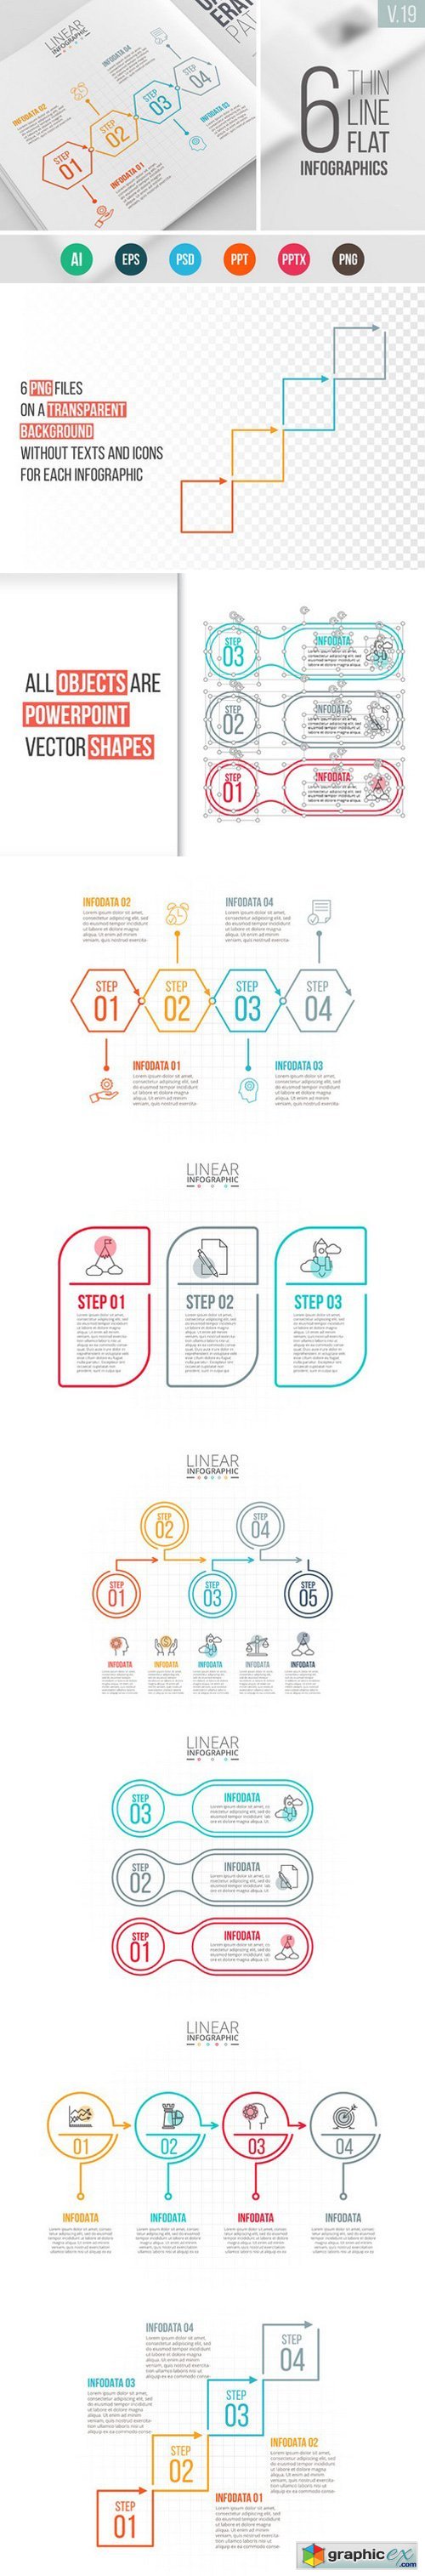 Linear elements for infographic v.19